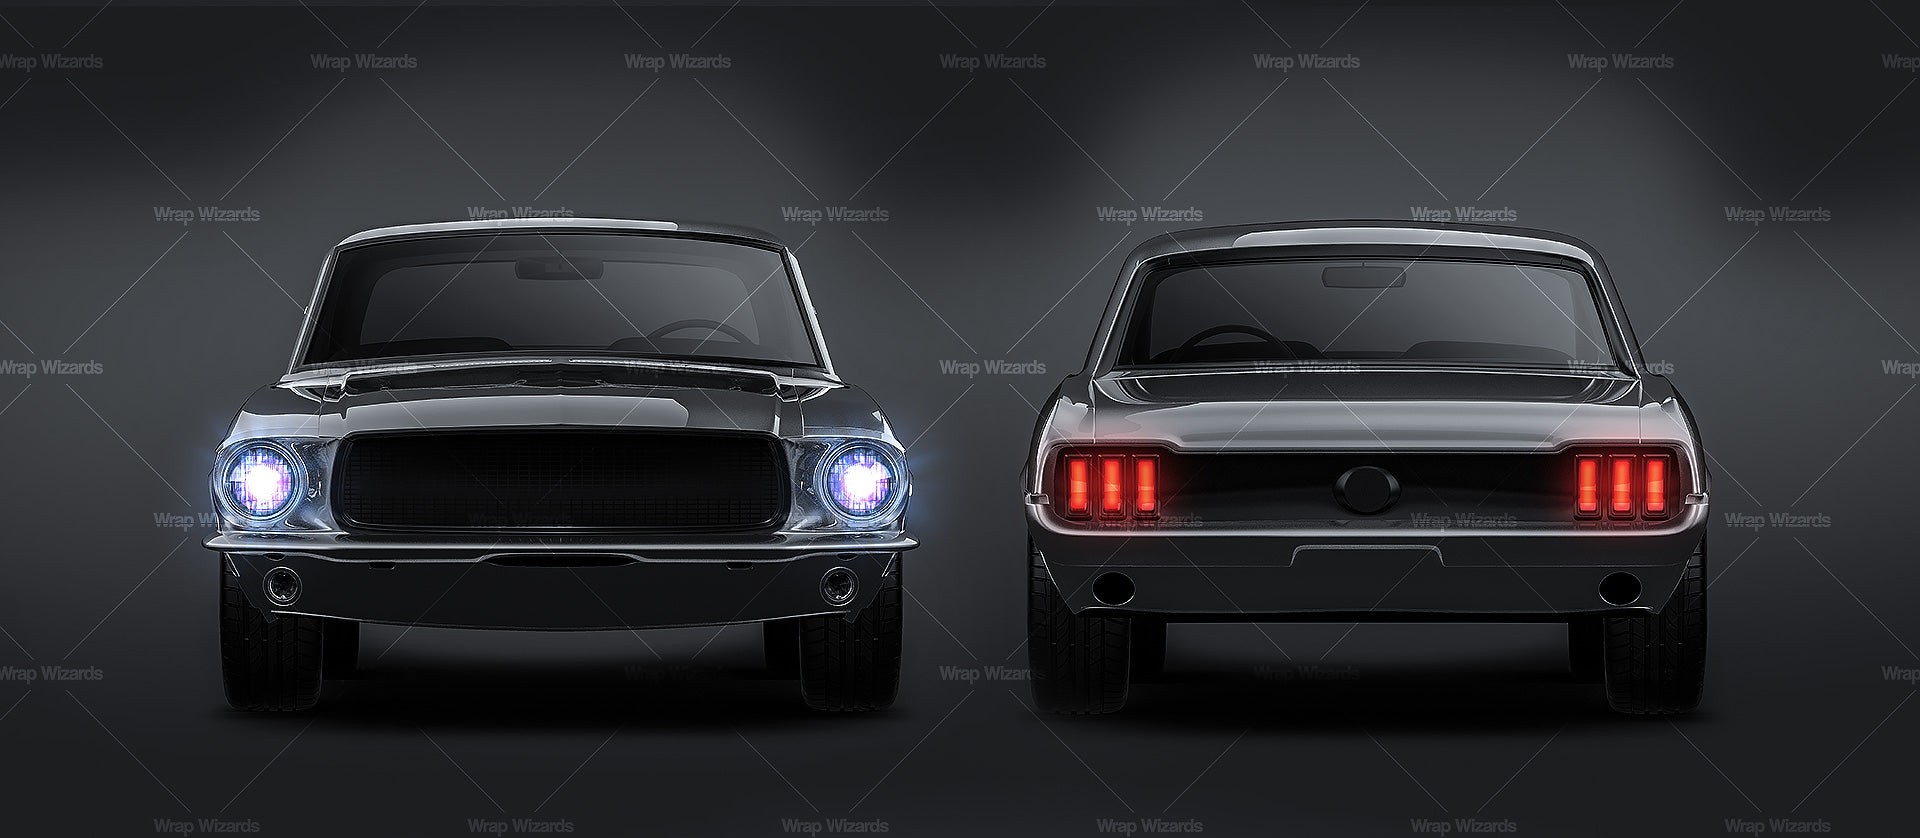 Ford Mustang '68 customized glossy finish - all sides Car Mockup Template.psd